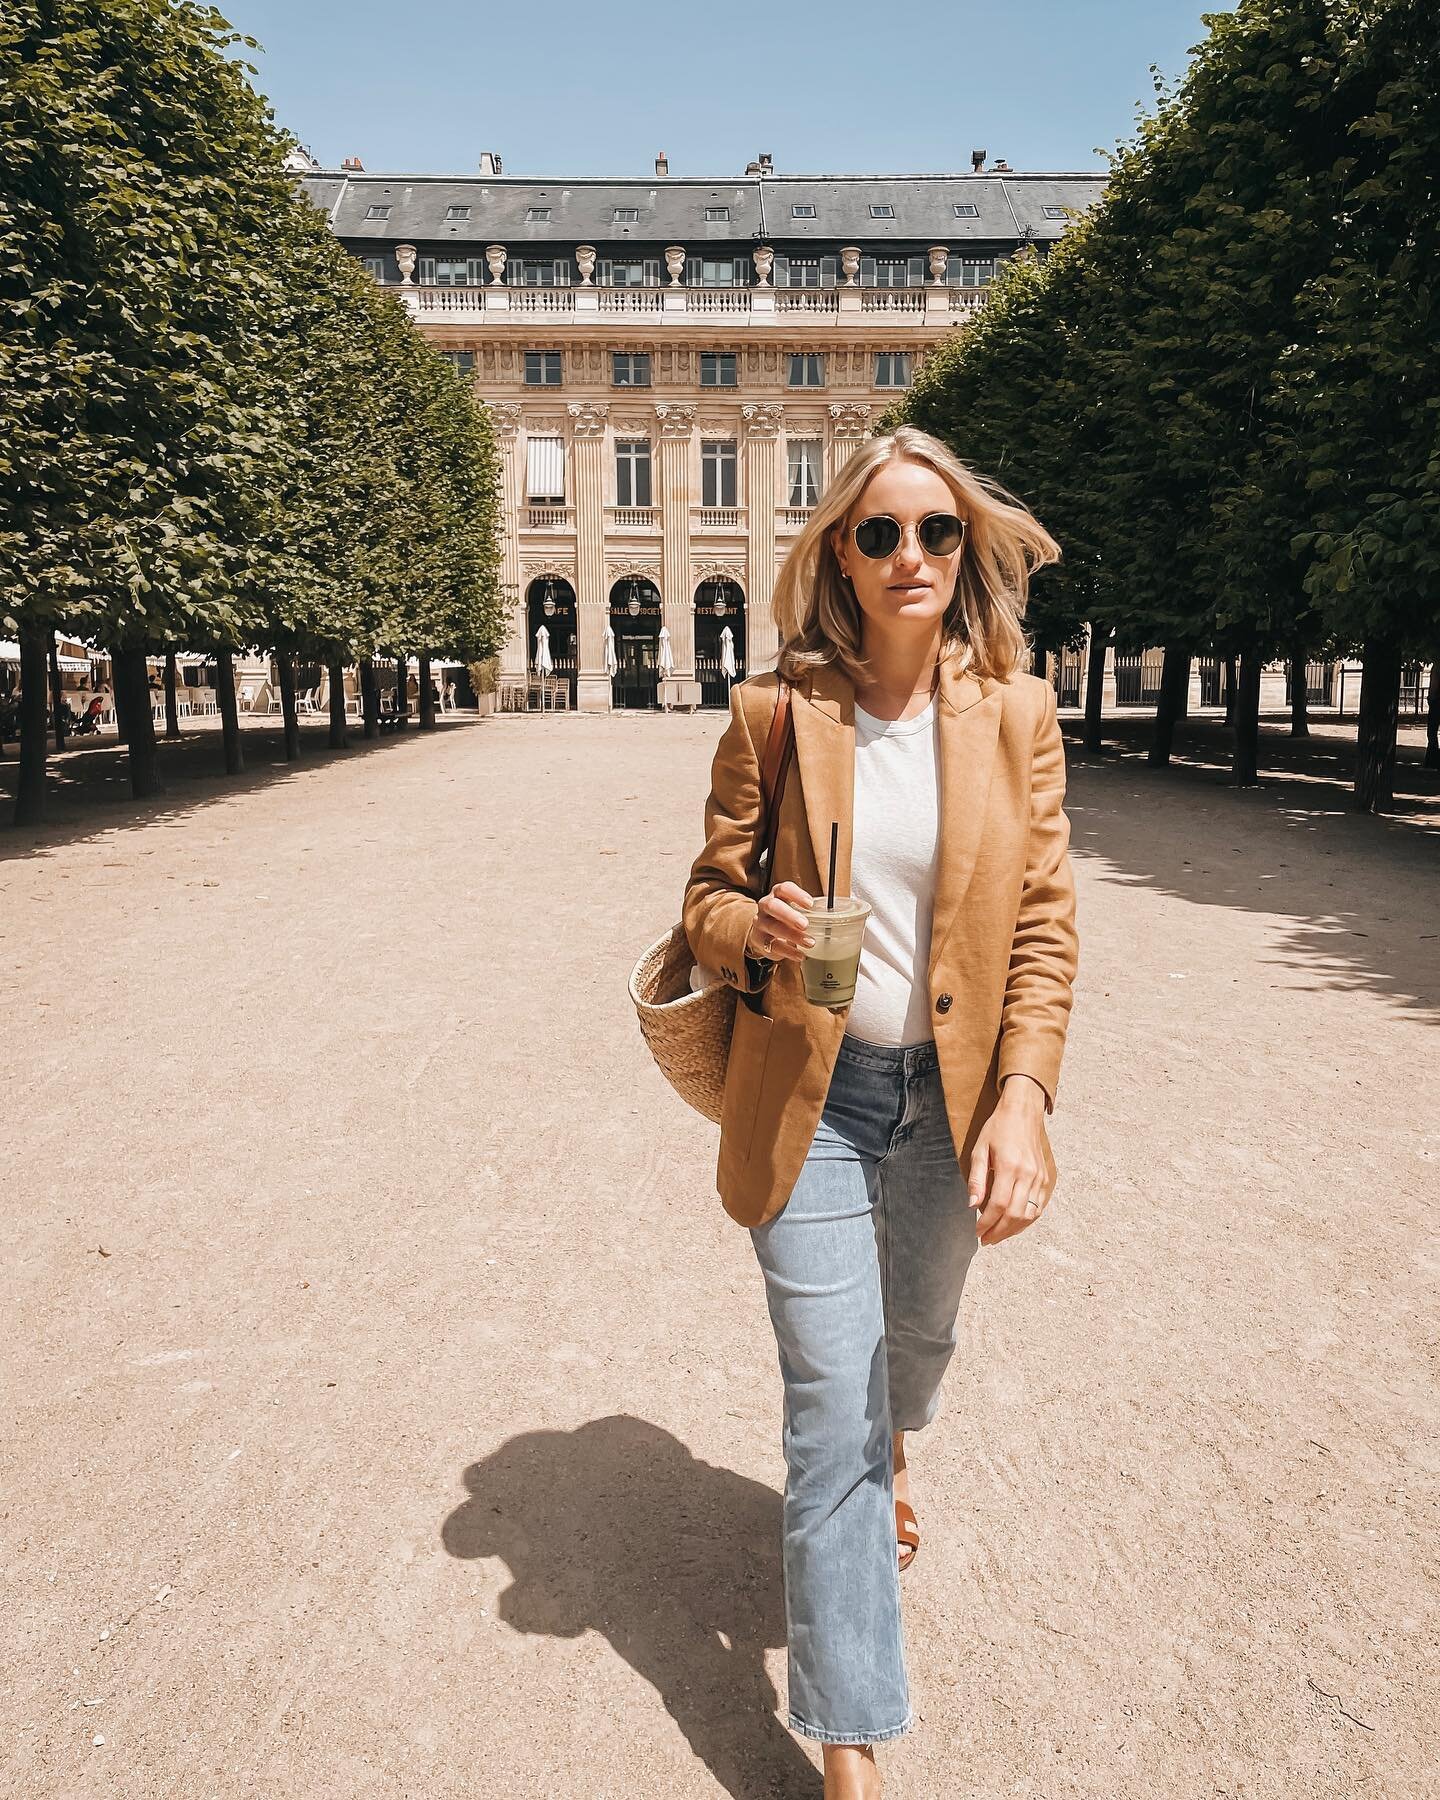 Paris day 3 🇫🇷 My travel advice for the day: A great blazer (or two) is the #1 piece you pack for Paris. We woke up on this day and the temperature went from 102 to 68! This @bashparis linen one is my favorite shade at the moment and tr&egrave;s ch